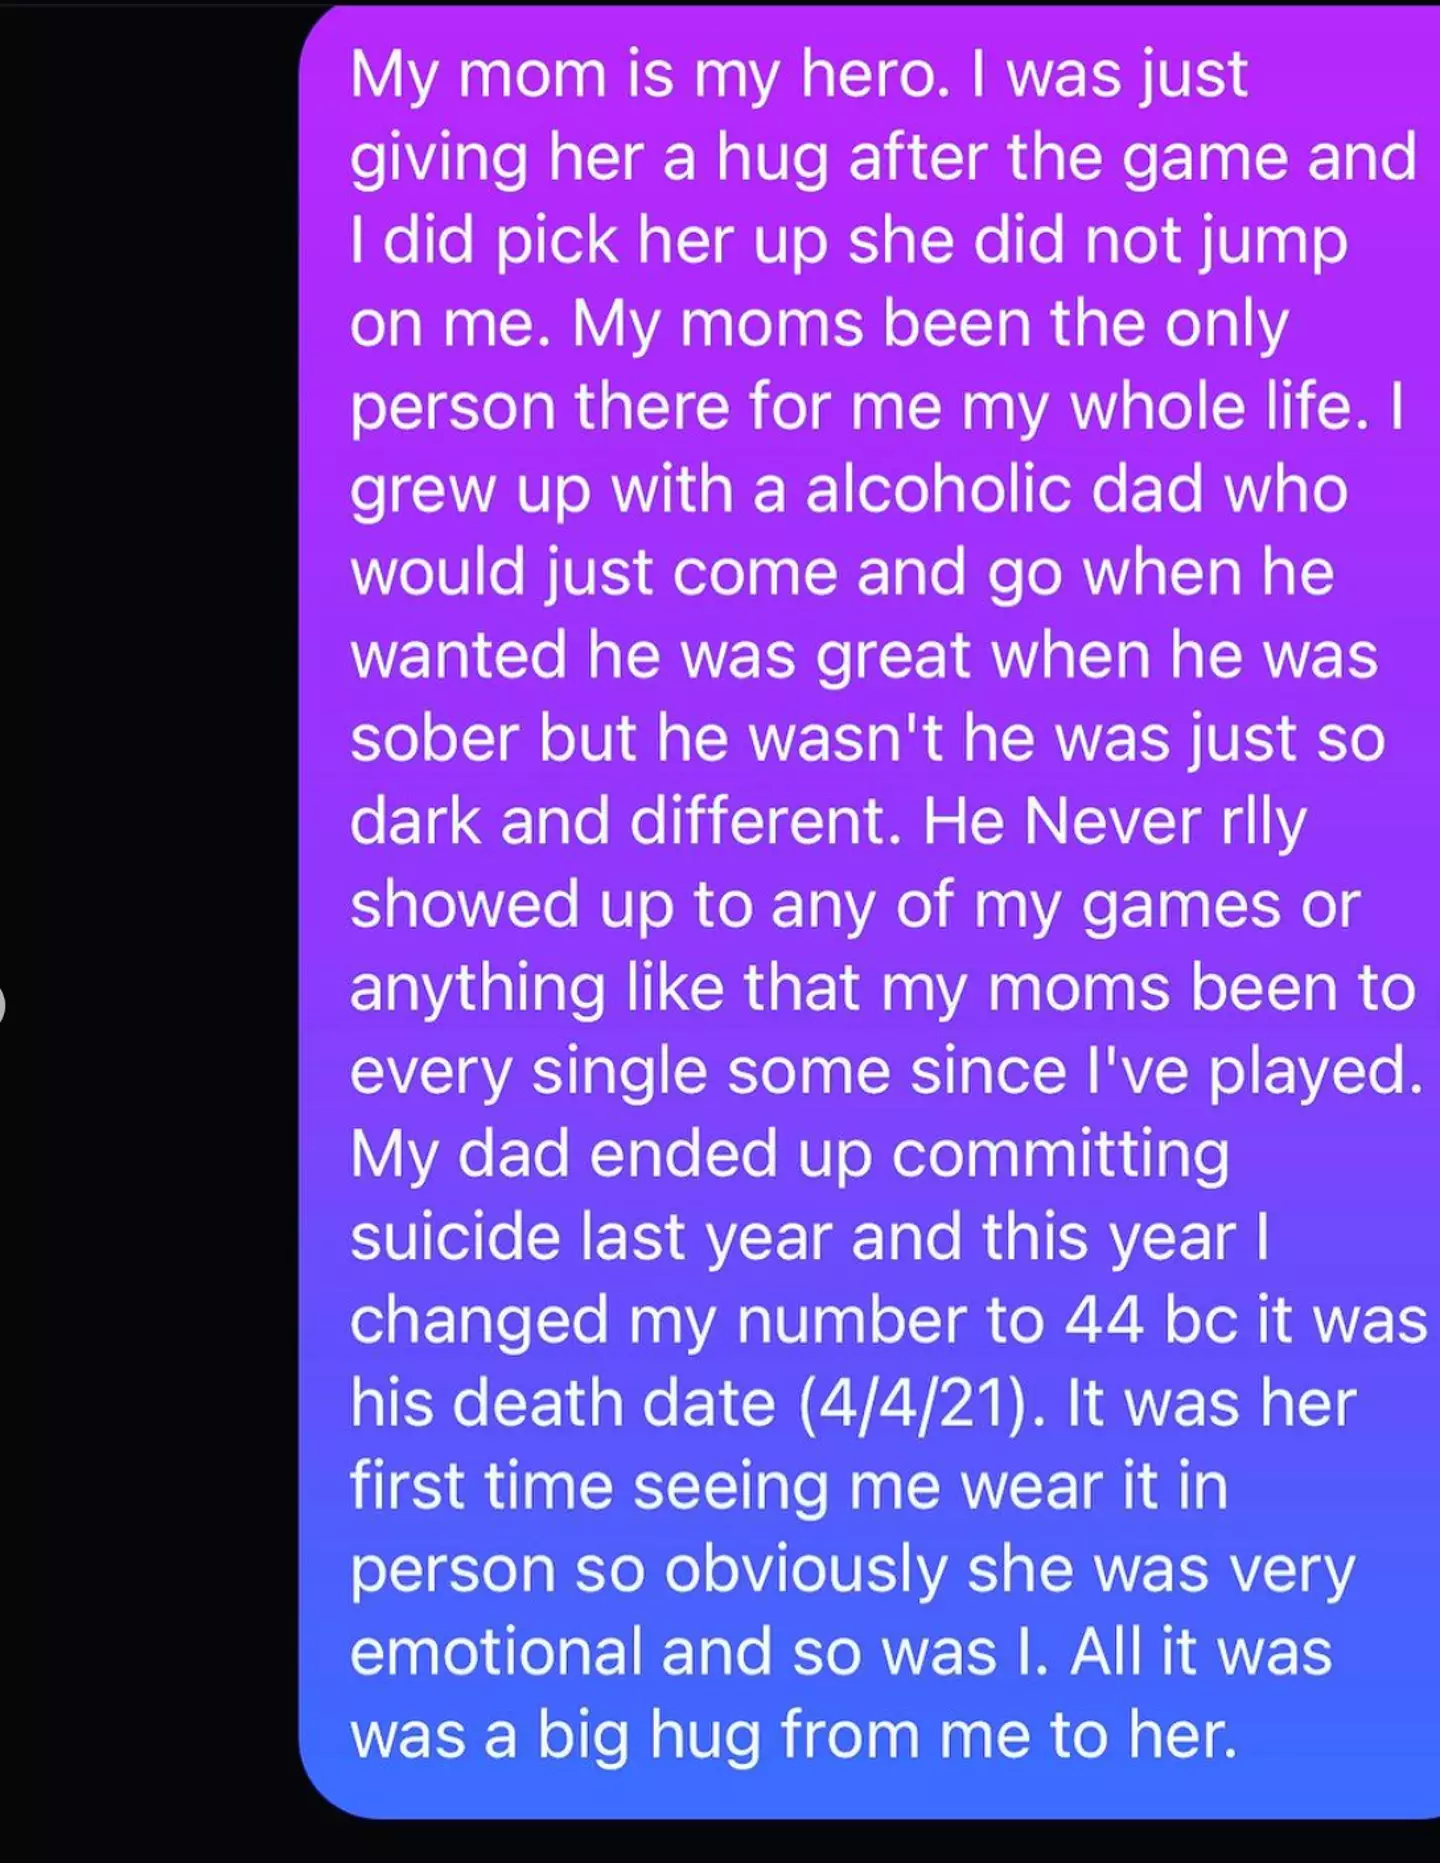 The text message Amber's son sent to someone who asked about the video.